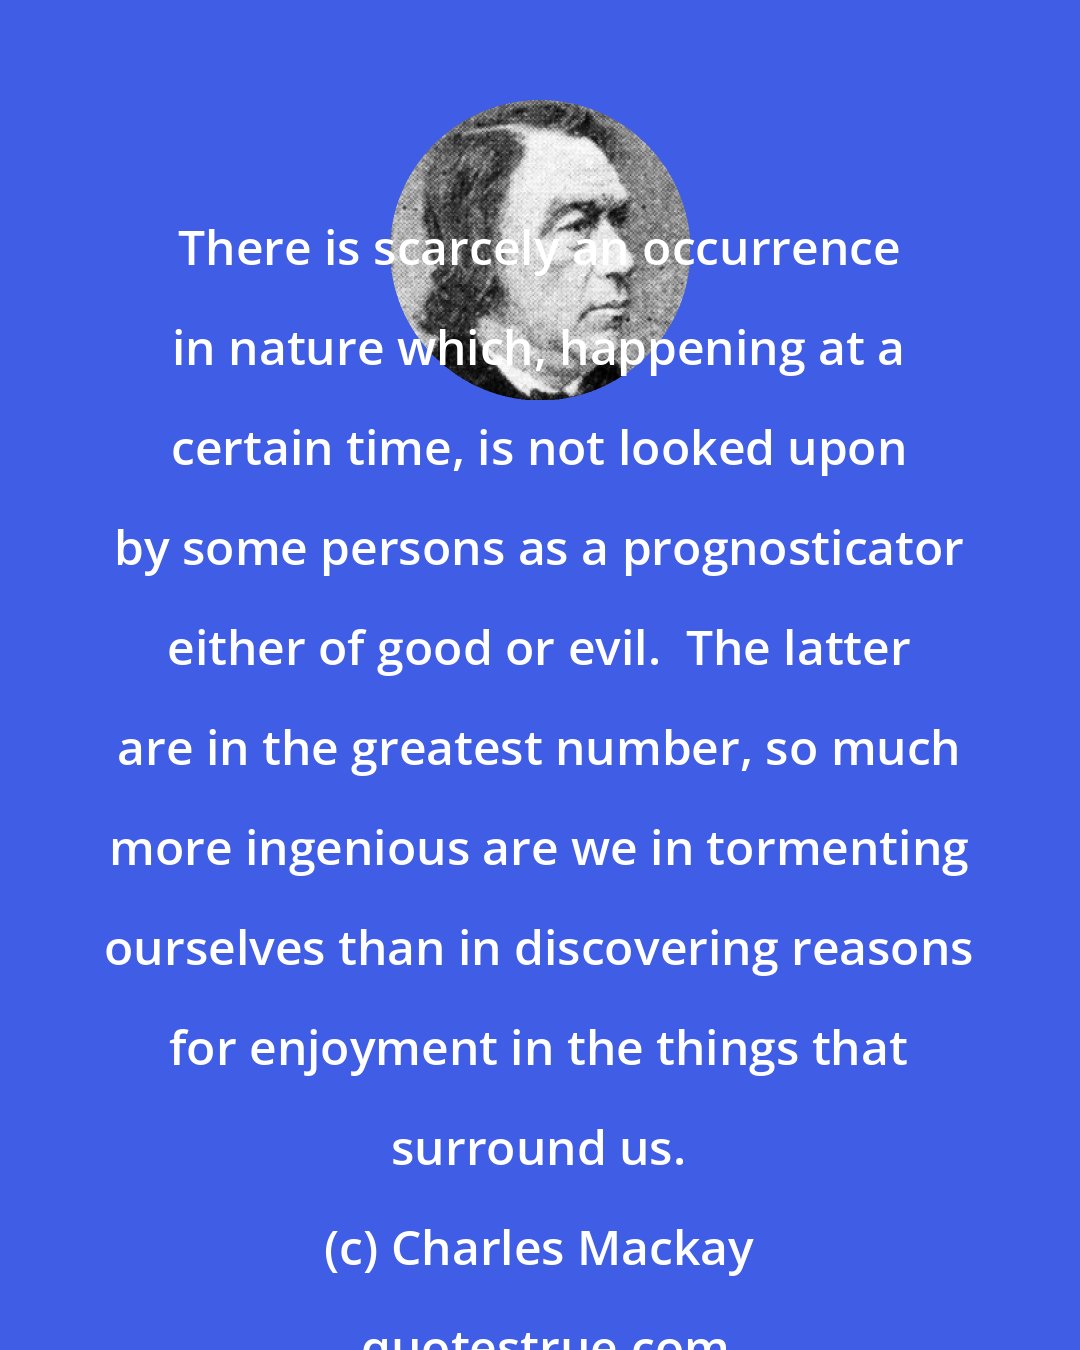 Charles Mackay: There is scarcely an occurrence in nature which, happening at a certain time, is not looked upon by some persons as a prognosticator either of good or evil.  The latter are in the greatest number, so much more ingenious are we in tormenting ourselves than in discovering reasons for enjoyment in the things that surround us.